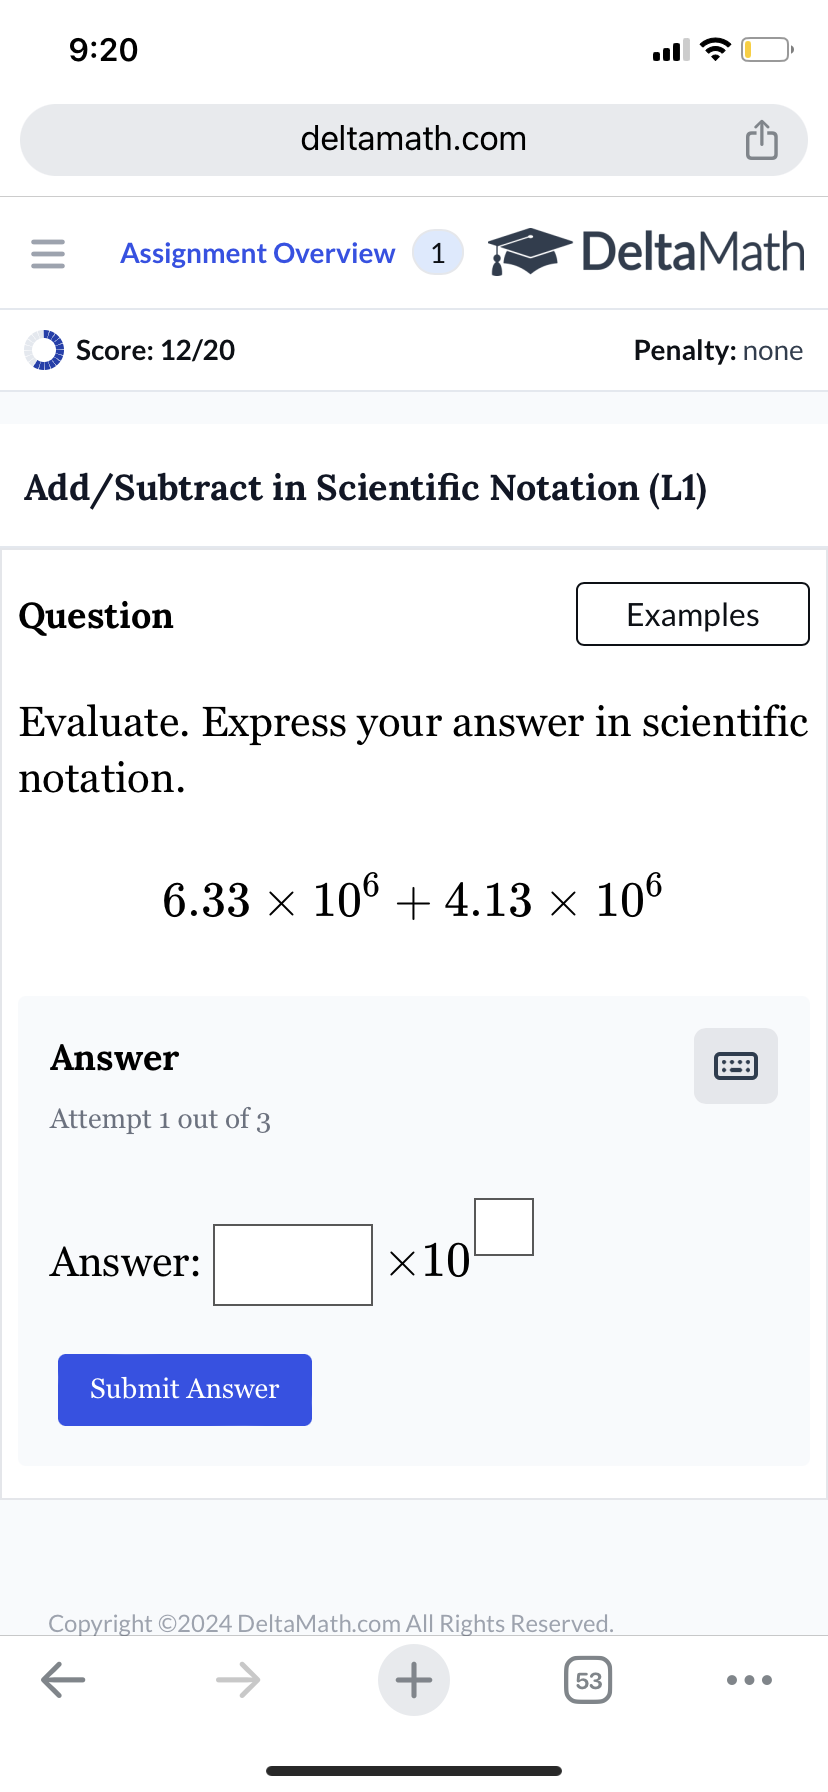 9:20
deltamath.com
= Assignment Overview 1
DeltaMath
Score: 12/20
Penalty: none
Add/Subtract in Scientific Notation (L1)
Question
Examples
Evaluate. Express your answer in scientific
notation.
6.33 × 106 +4.13 × 106
Answer
Attempt 1 out of 3
Answer:
Submit Answer
×10
Copyright ©2024 DeltaMath.com All Rights Reserved.
←
+
53